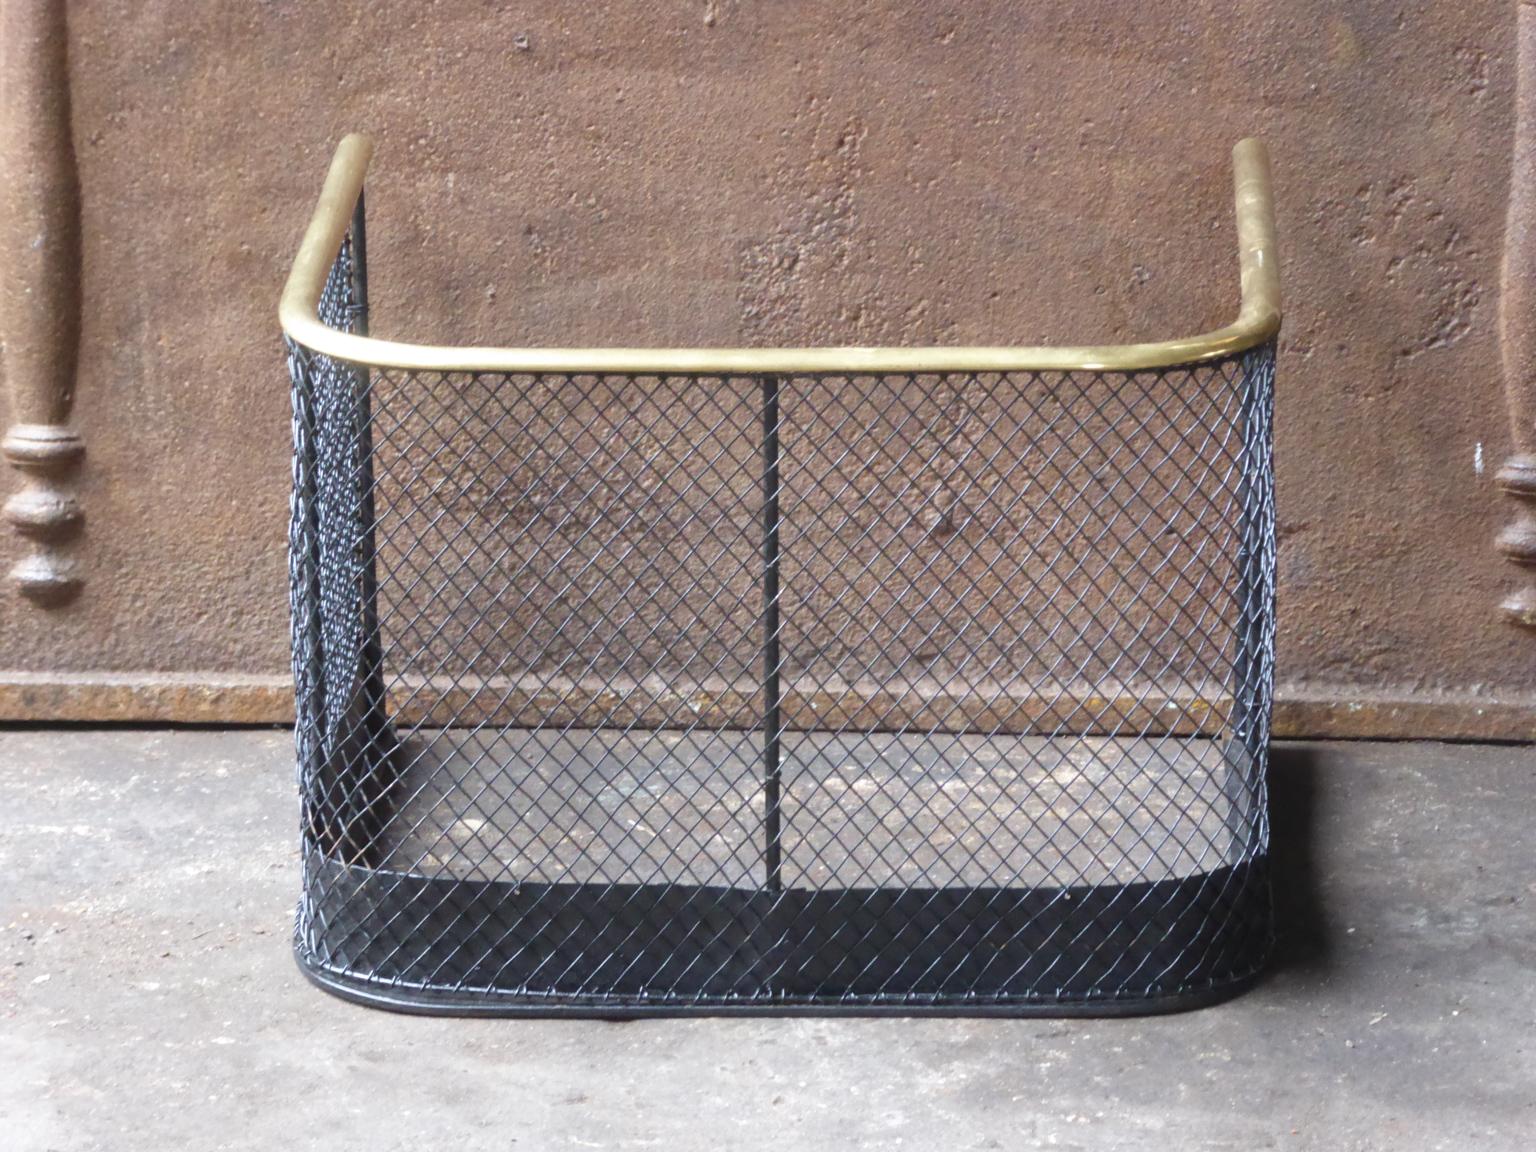 19th century English Victorian fireguard - fireplace guard made of polished brass, iron and iron mesh. The fire guard is in a good condition and is fully functional.







 